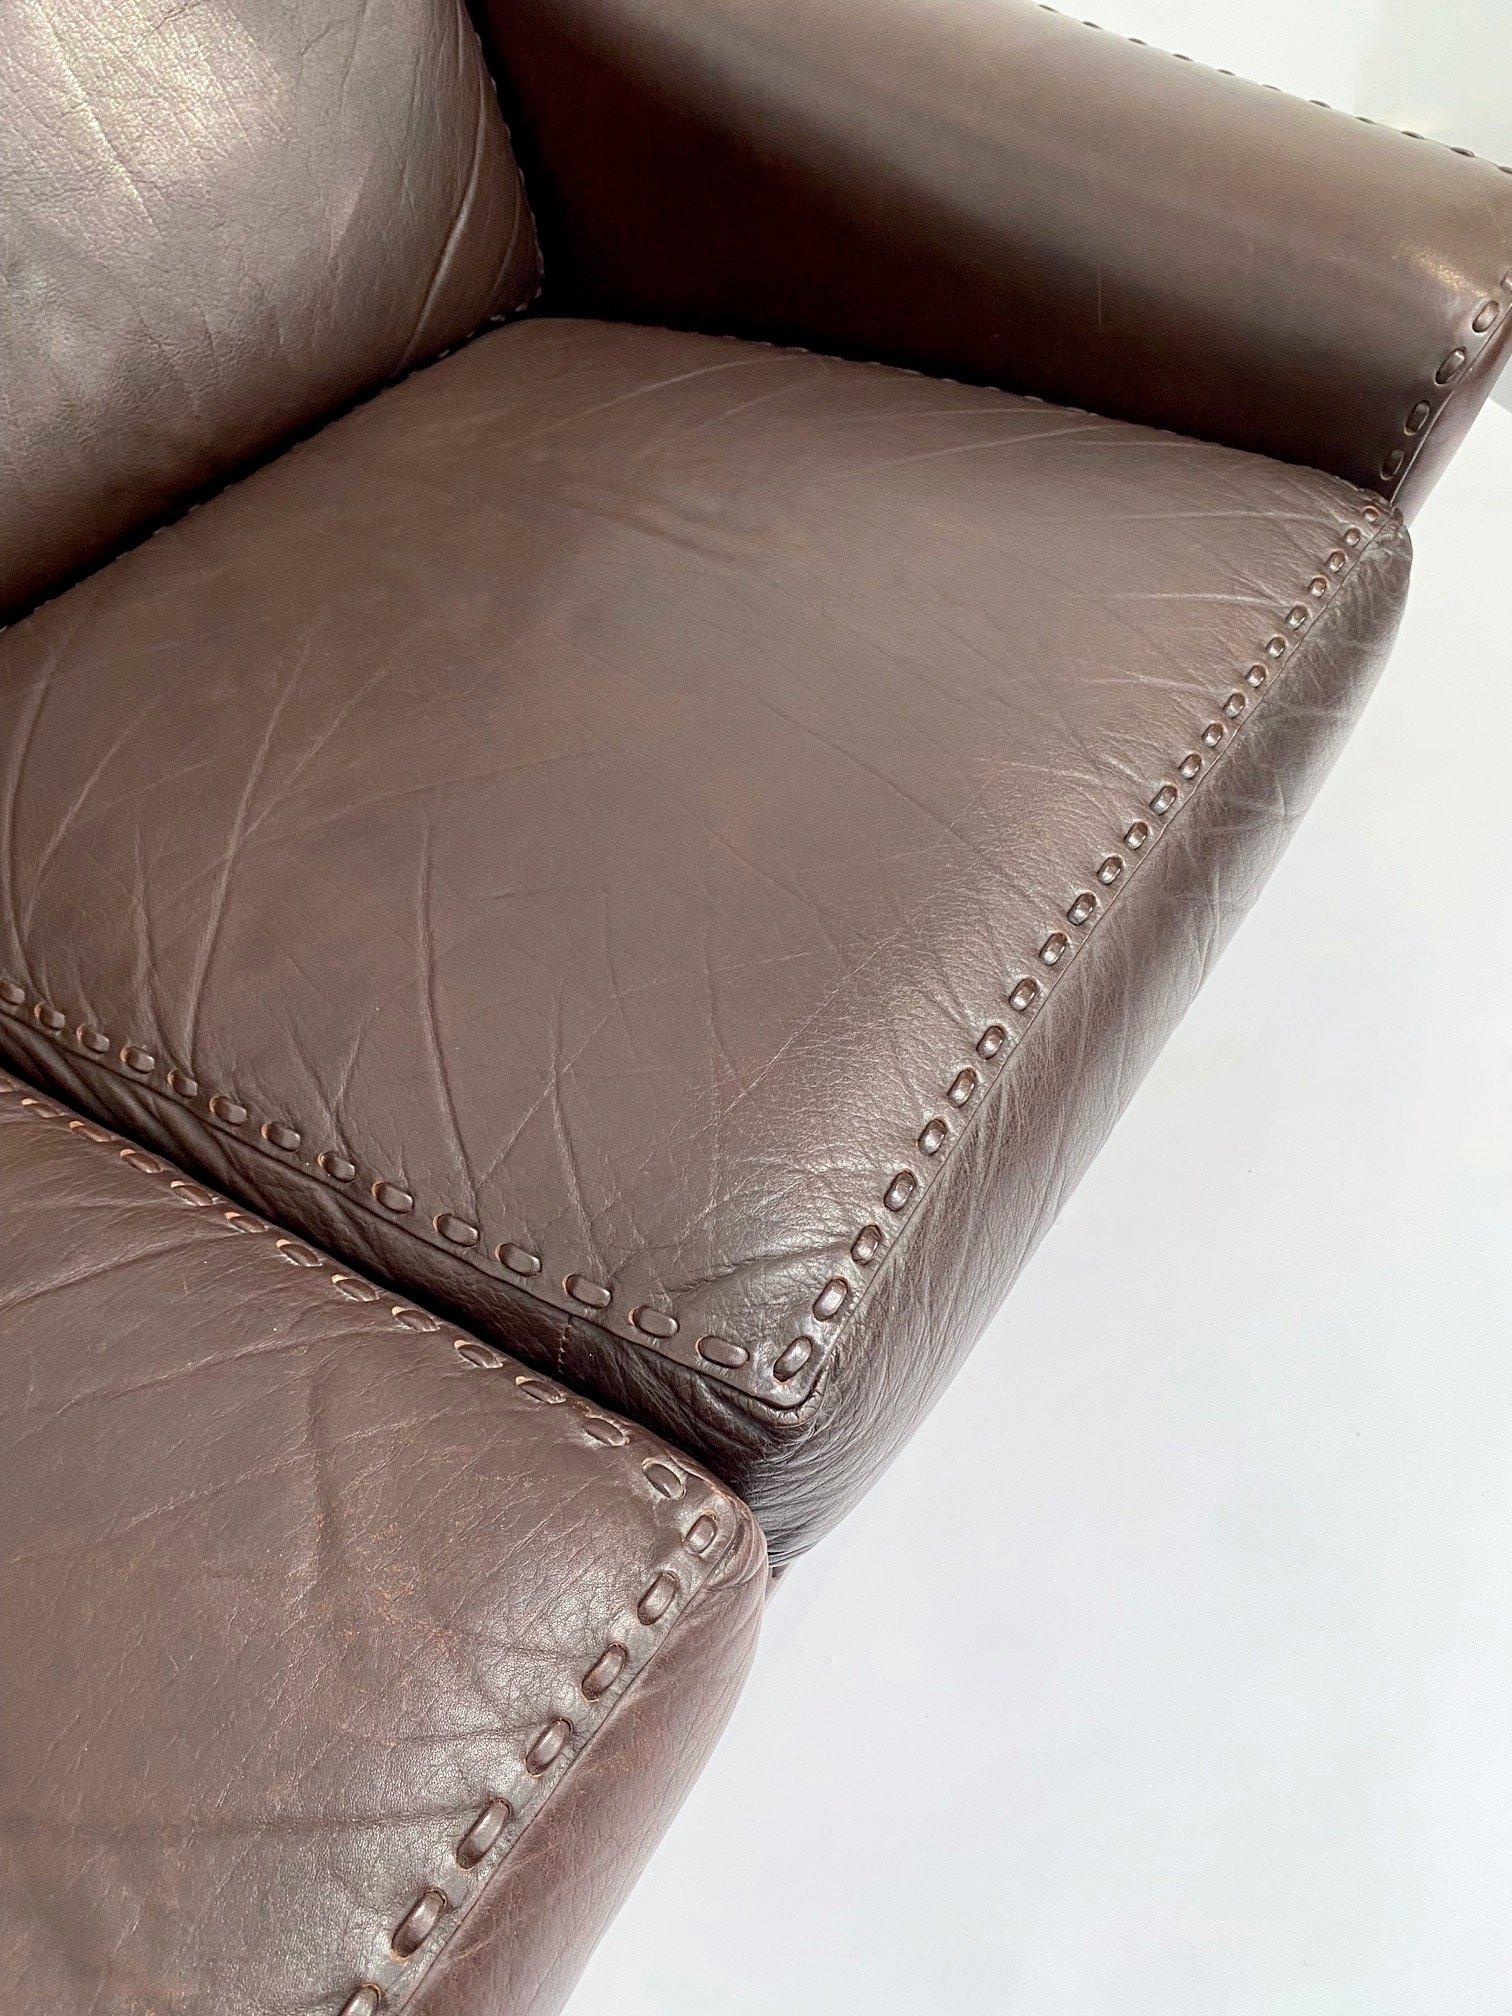 'Matador' Dark Brown Leather 2 Seater Sofa by Aage Christiansen 6